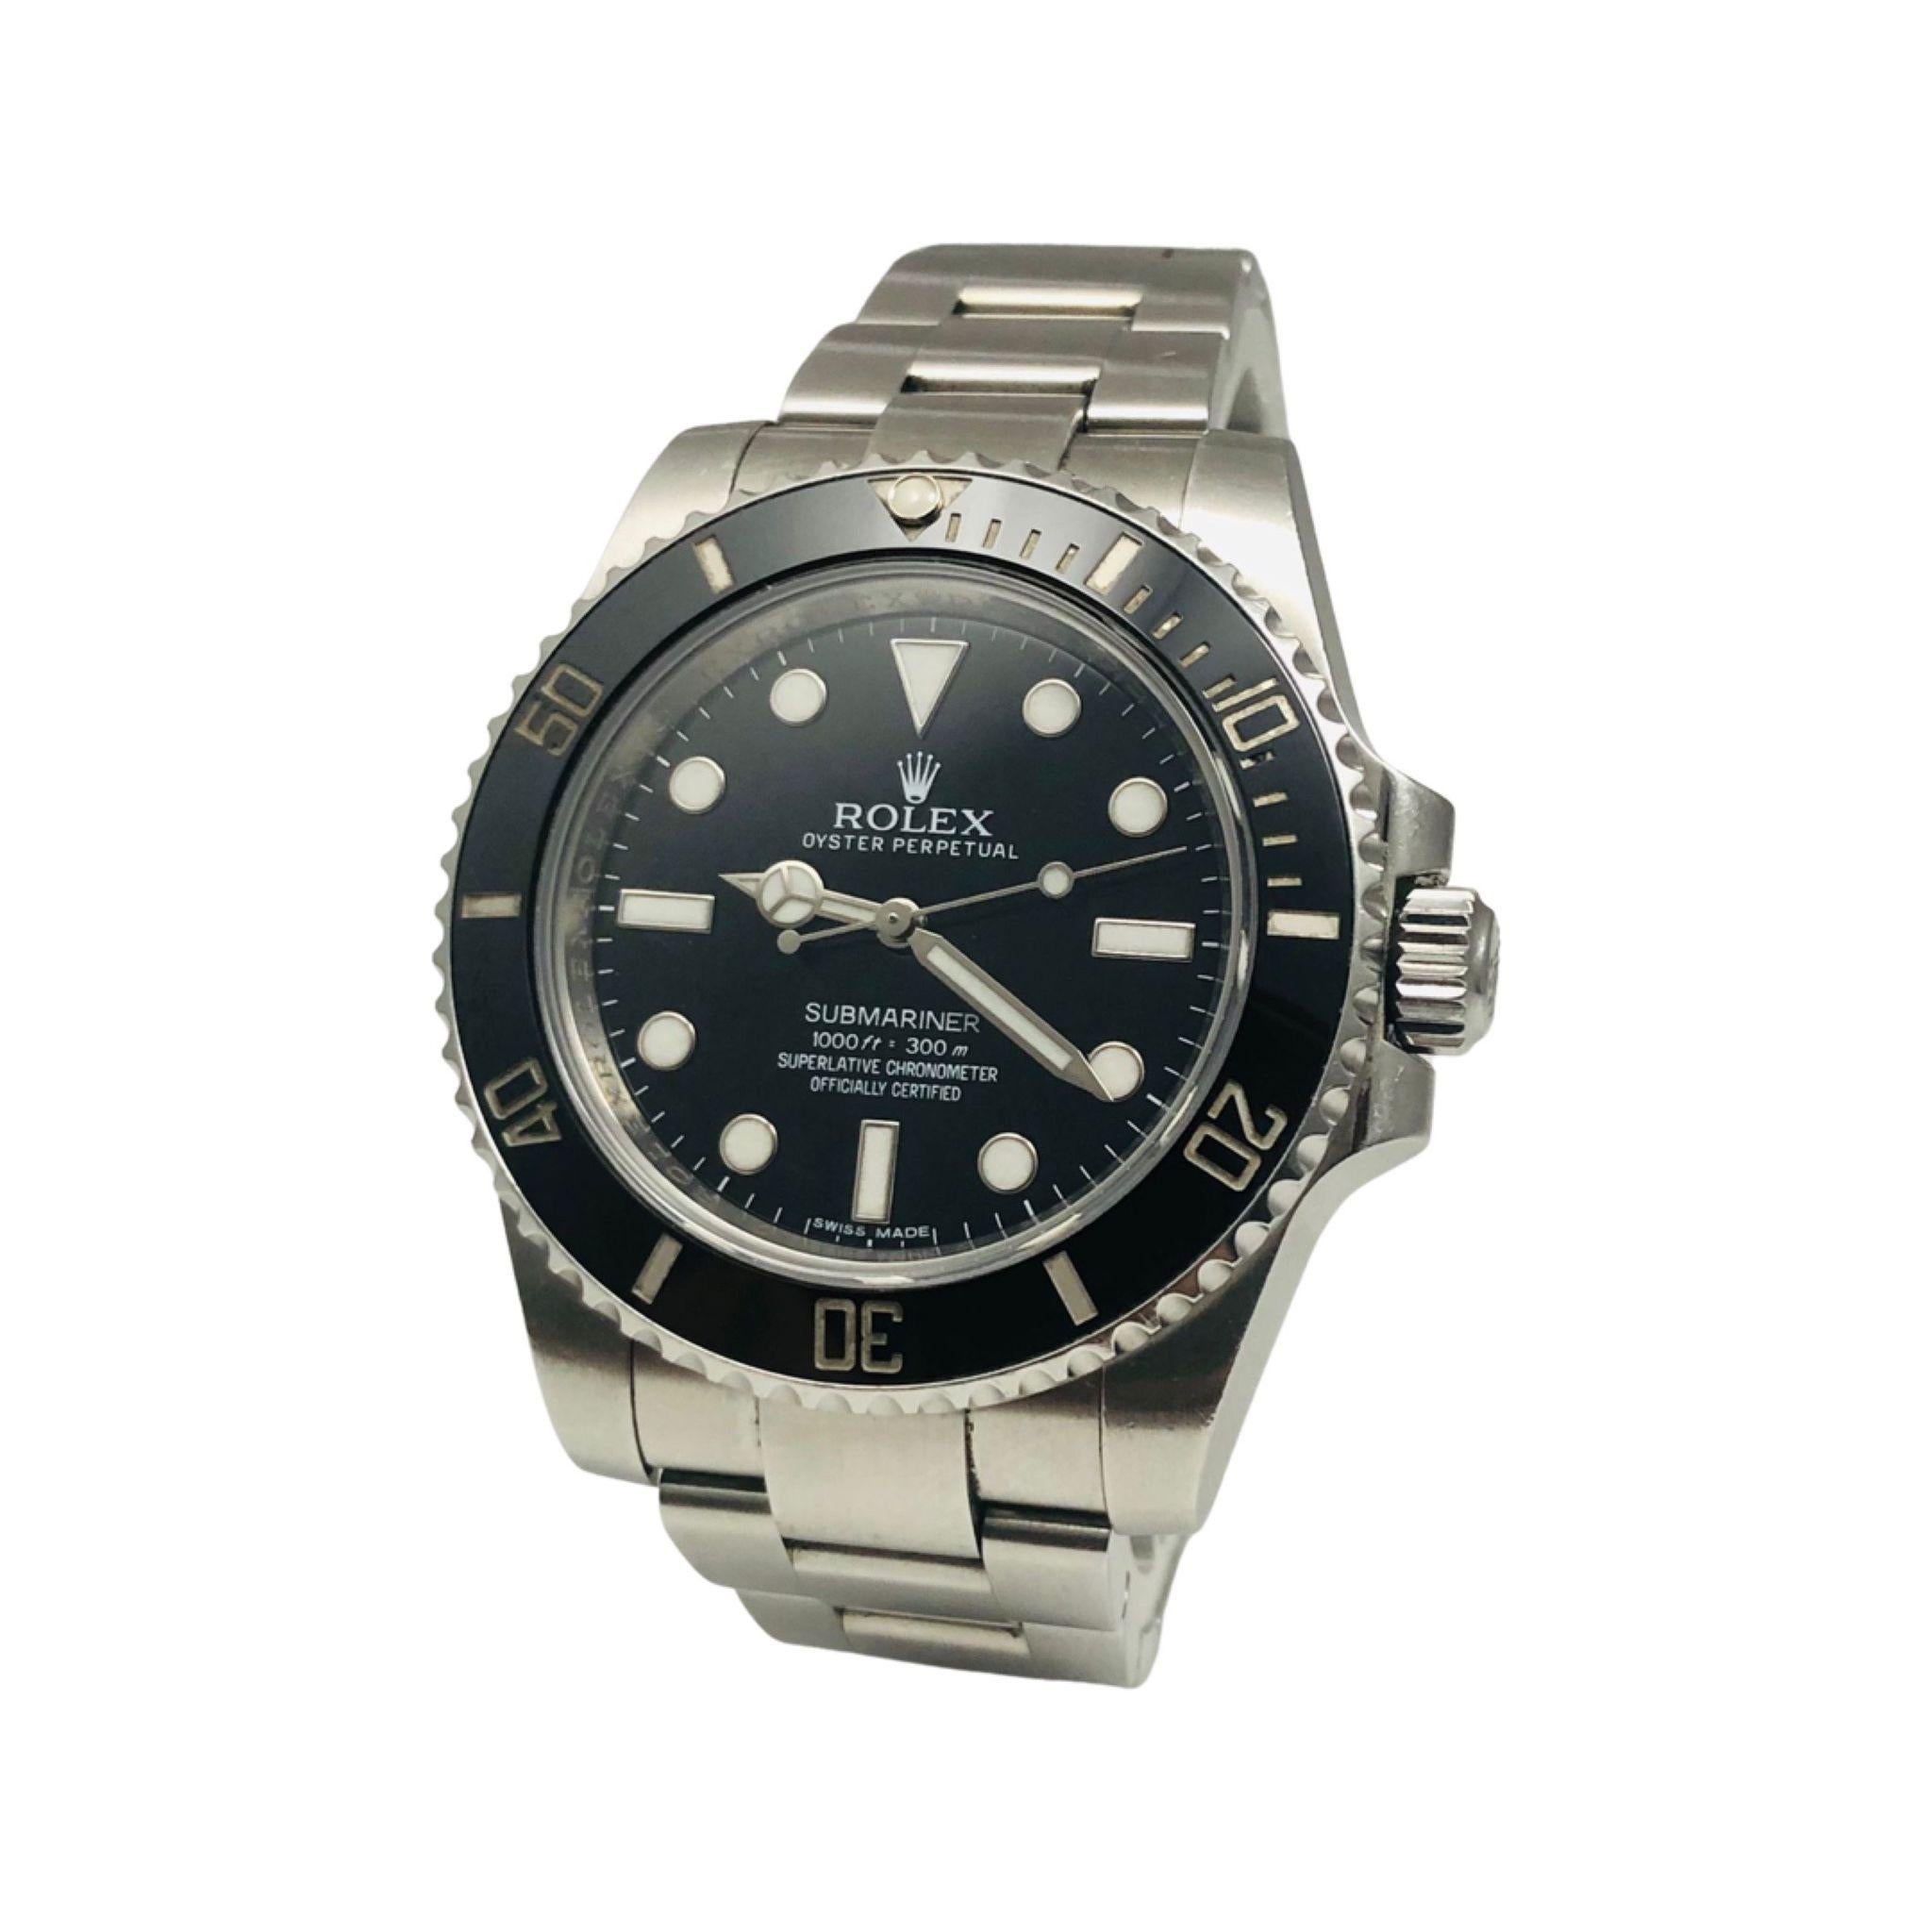 ITEM SPECIFICATION:

Brand: Rolex

Model Name: Submariner

Model Number: 114060

Movement: Automatic

Case Size: 40 mm

Case Material: Stainless Steel

Dial: Black

Bracelet: Oyster

Hour Markers: Non-Numerical

Features: Hours, Minutes,